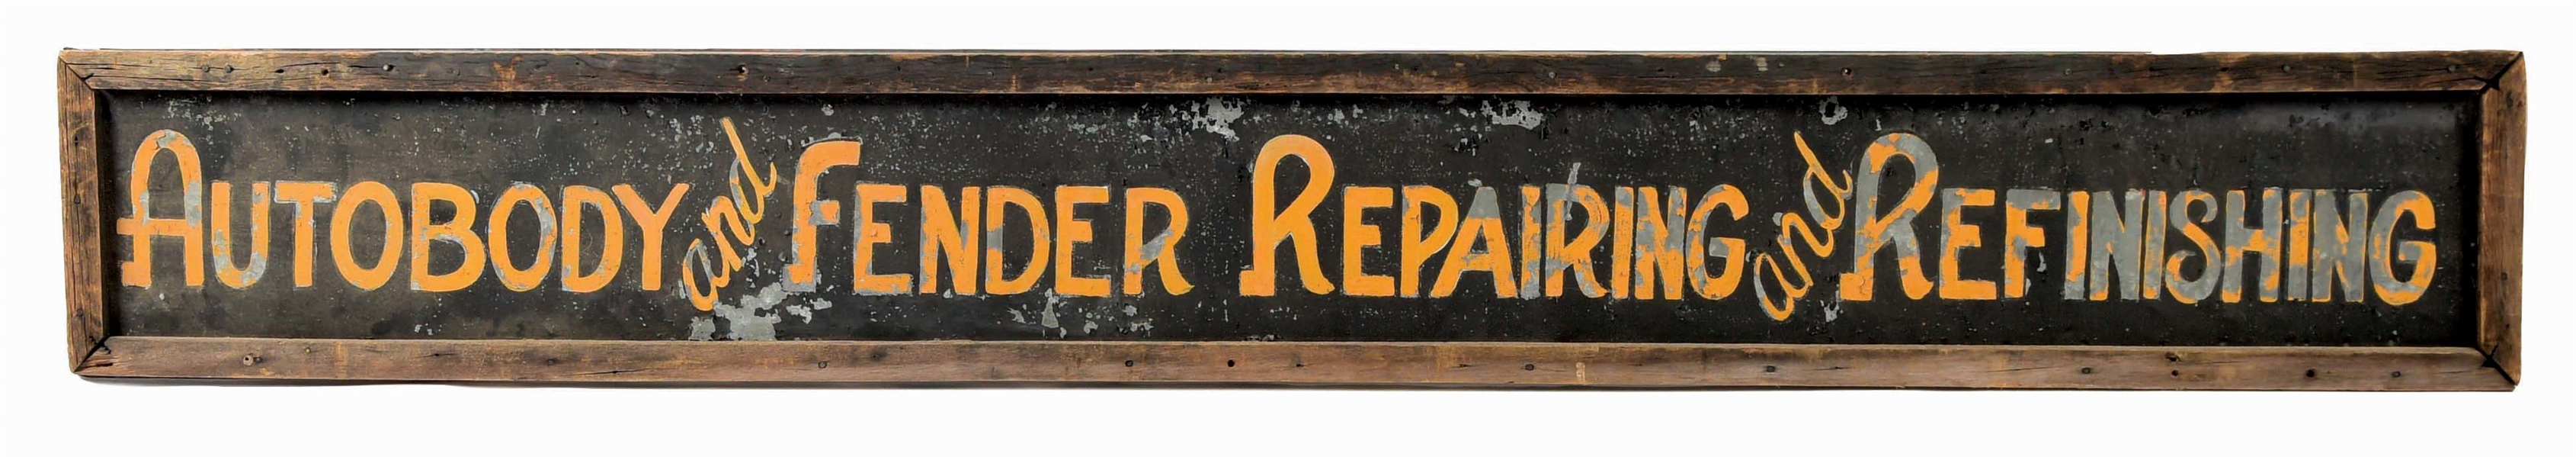 HAND PAINTED AUTOBODY AND FENDER REPAIRING & REFINISHING TIN SIGN W/ WOOD FRAME. 